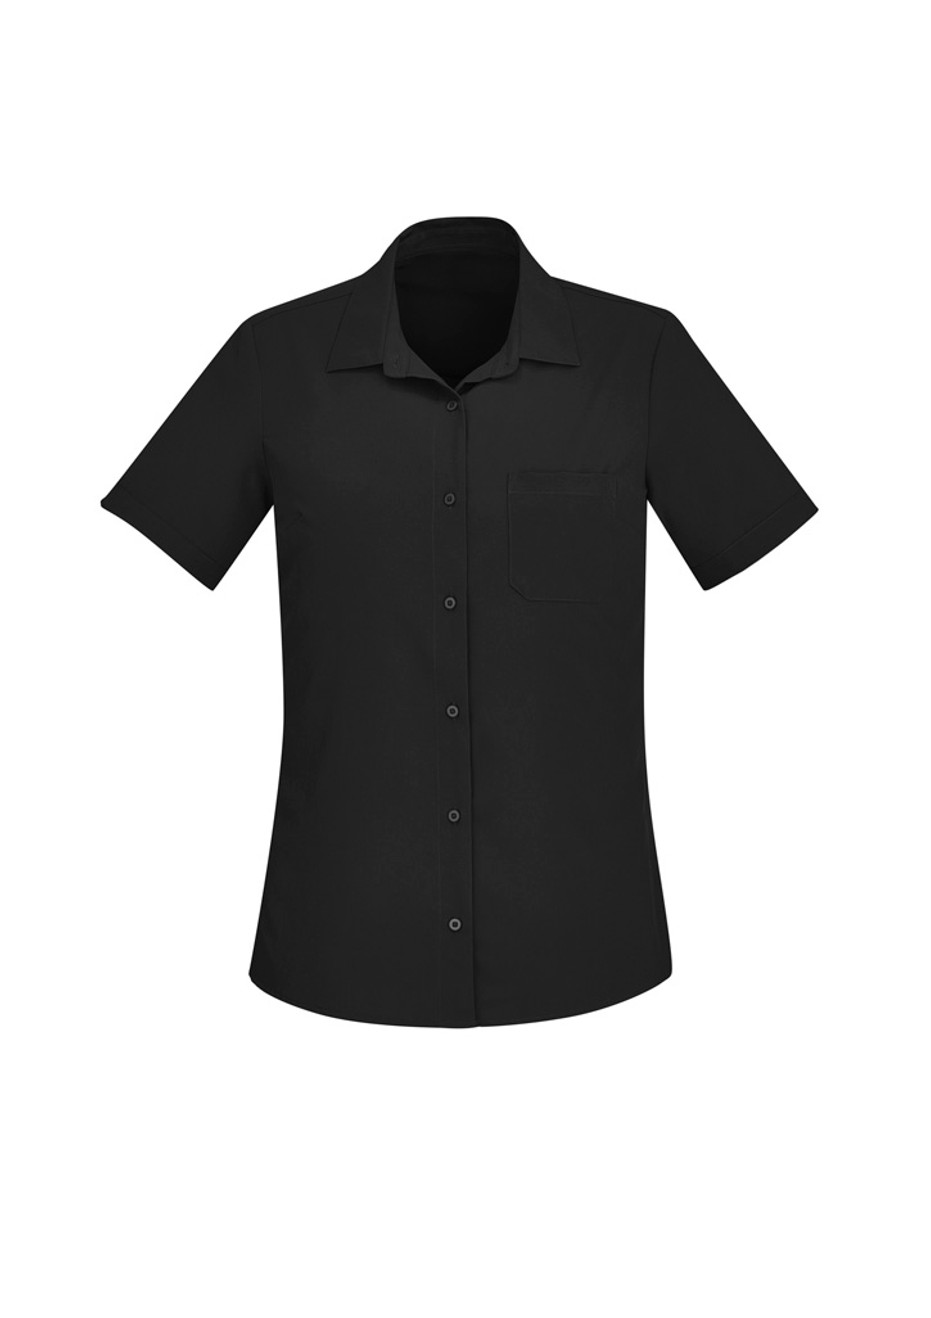 Biz Care CS947LS Womens Florence Short Sleeve Shirt | Available Colours: Black, Purple, Mid Blue, Teal, Cherry, Charcoal, Navy, Electric Blue